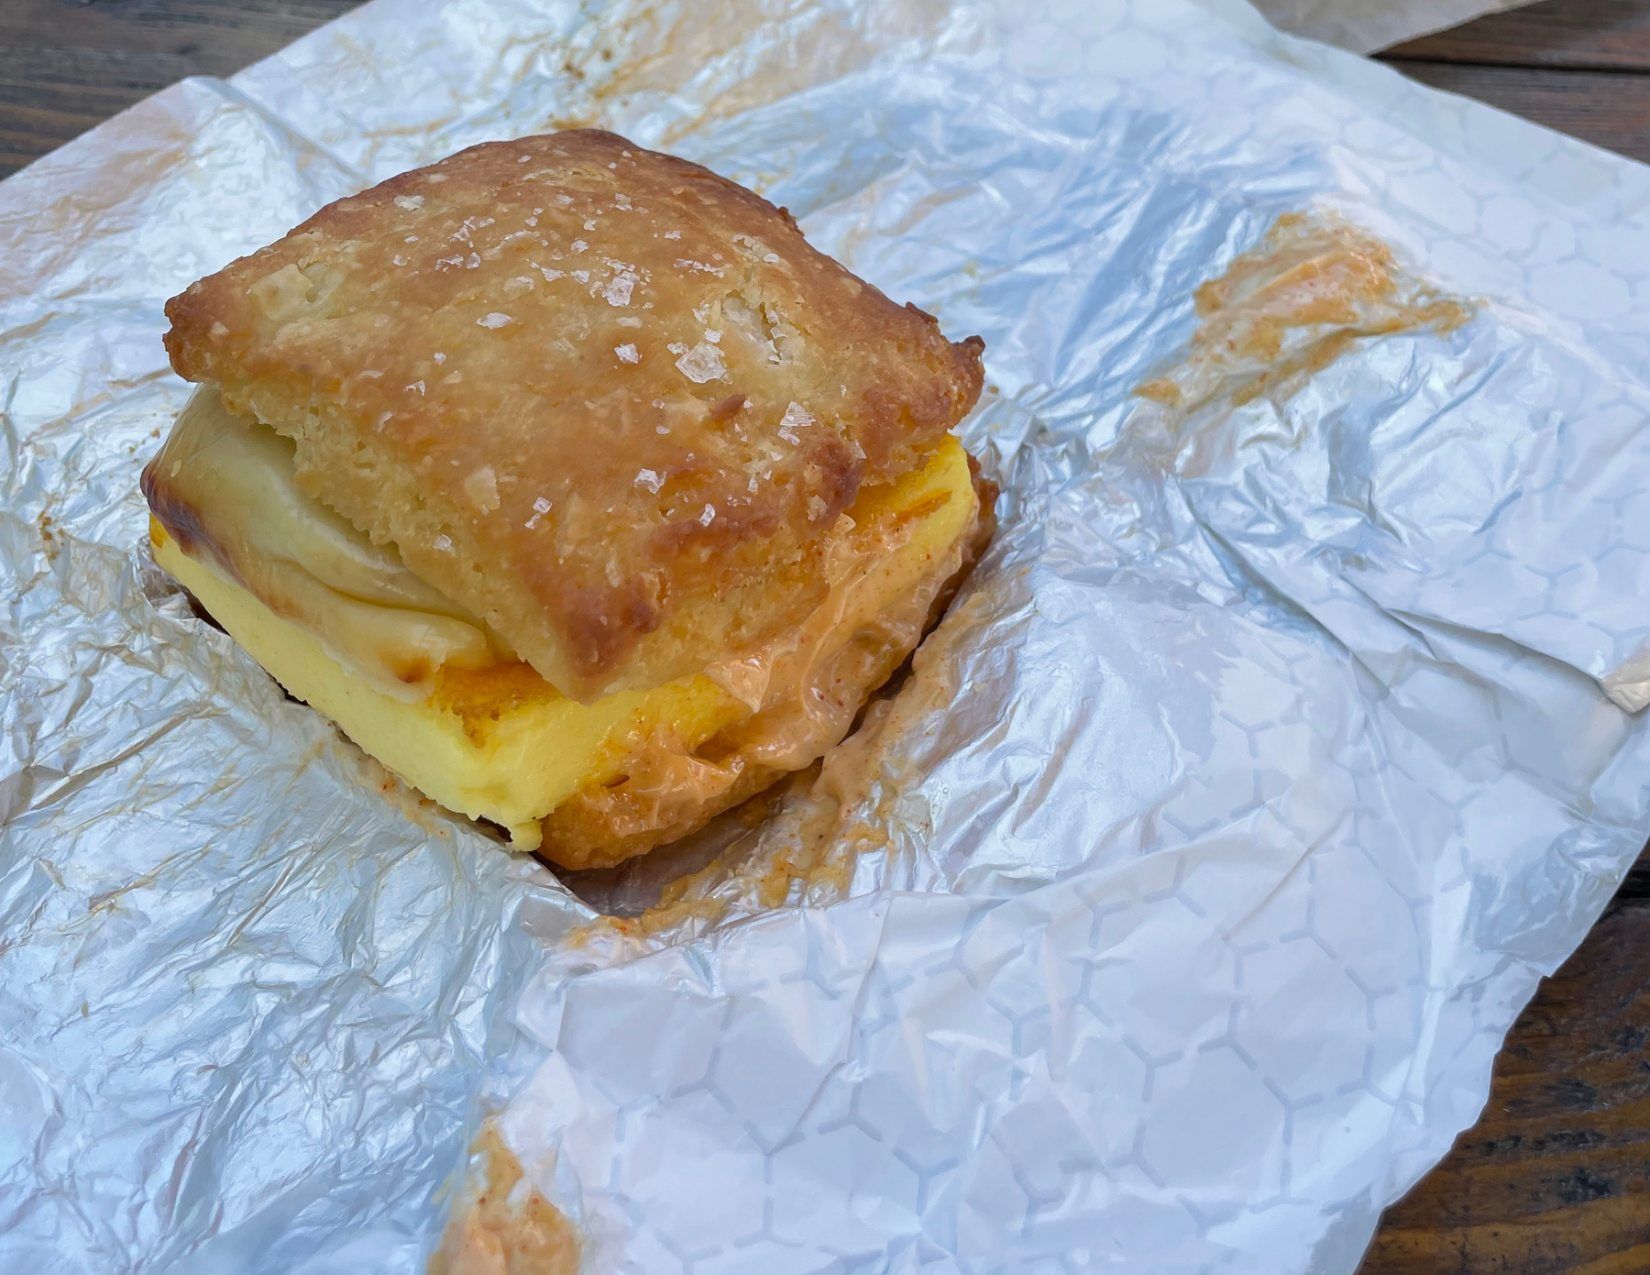 A perfectly flakey biscuit with egg, cheese, and chorizo, wrapped in foil, for breakfast in Portland, Maine